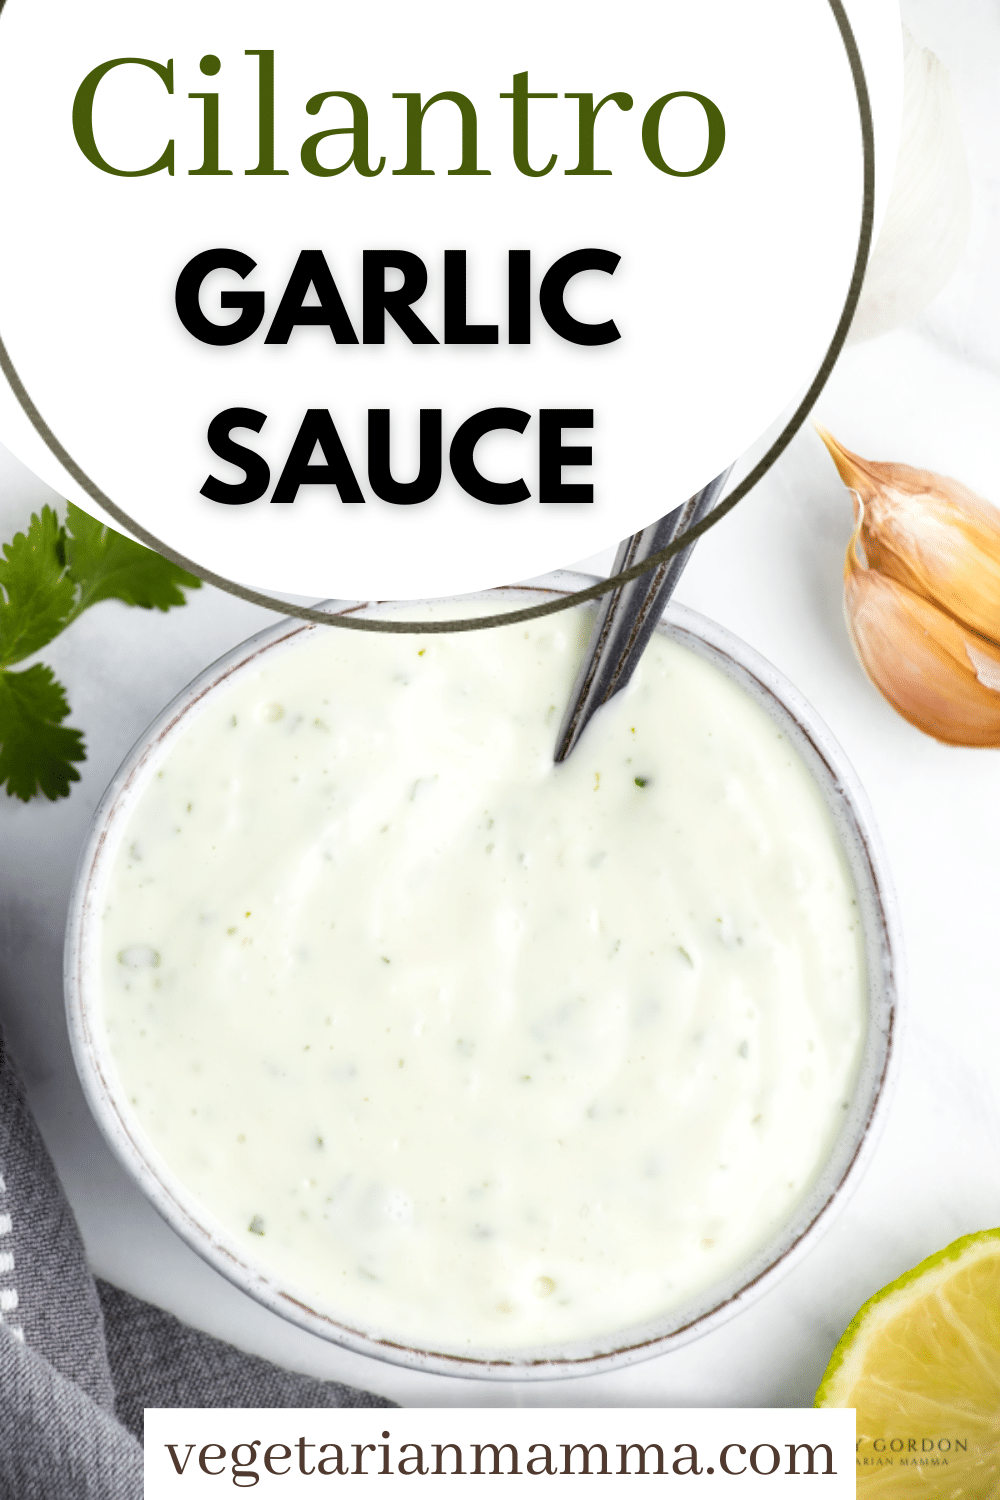 This cilantro garlic sauce packs the flavor with only 6 simple ingredients. This creamy and delicious garlic cilantro sauce comes together in only 5 minutes! #cilantrogarlicsauce #garliccilantrosauce